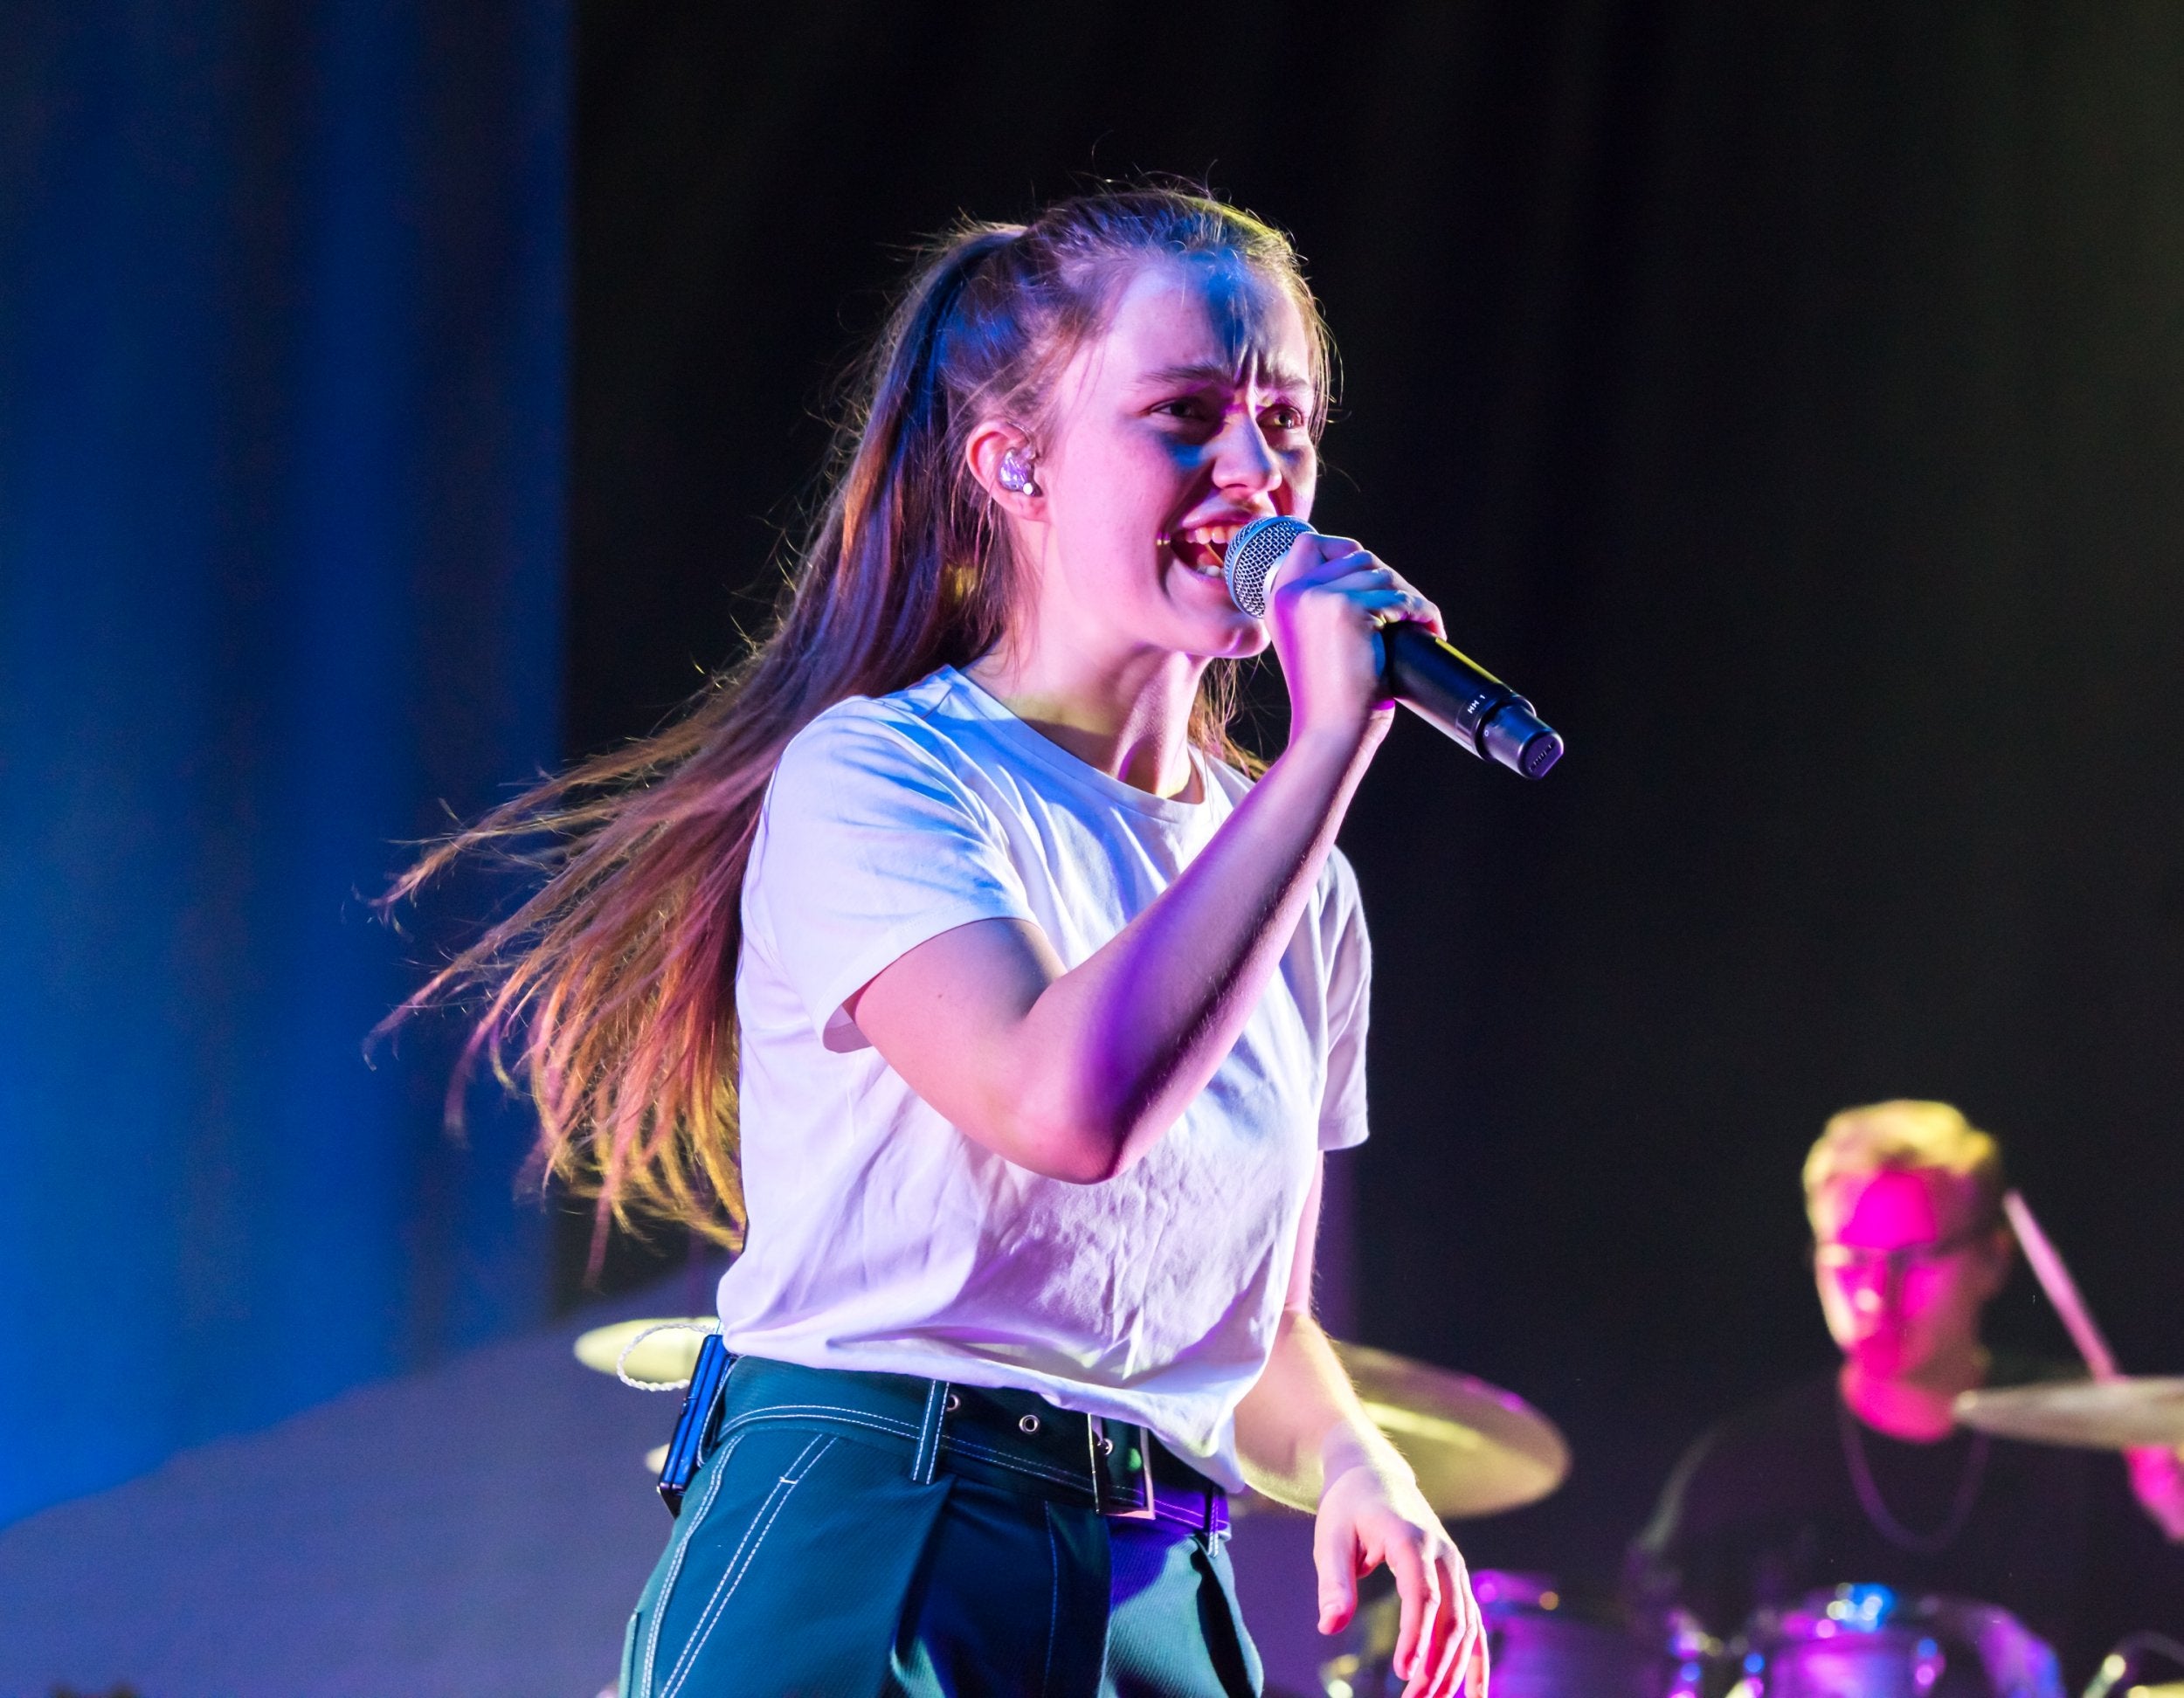 Sigrid commands the vast stage like she's played such venues all her life